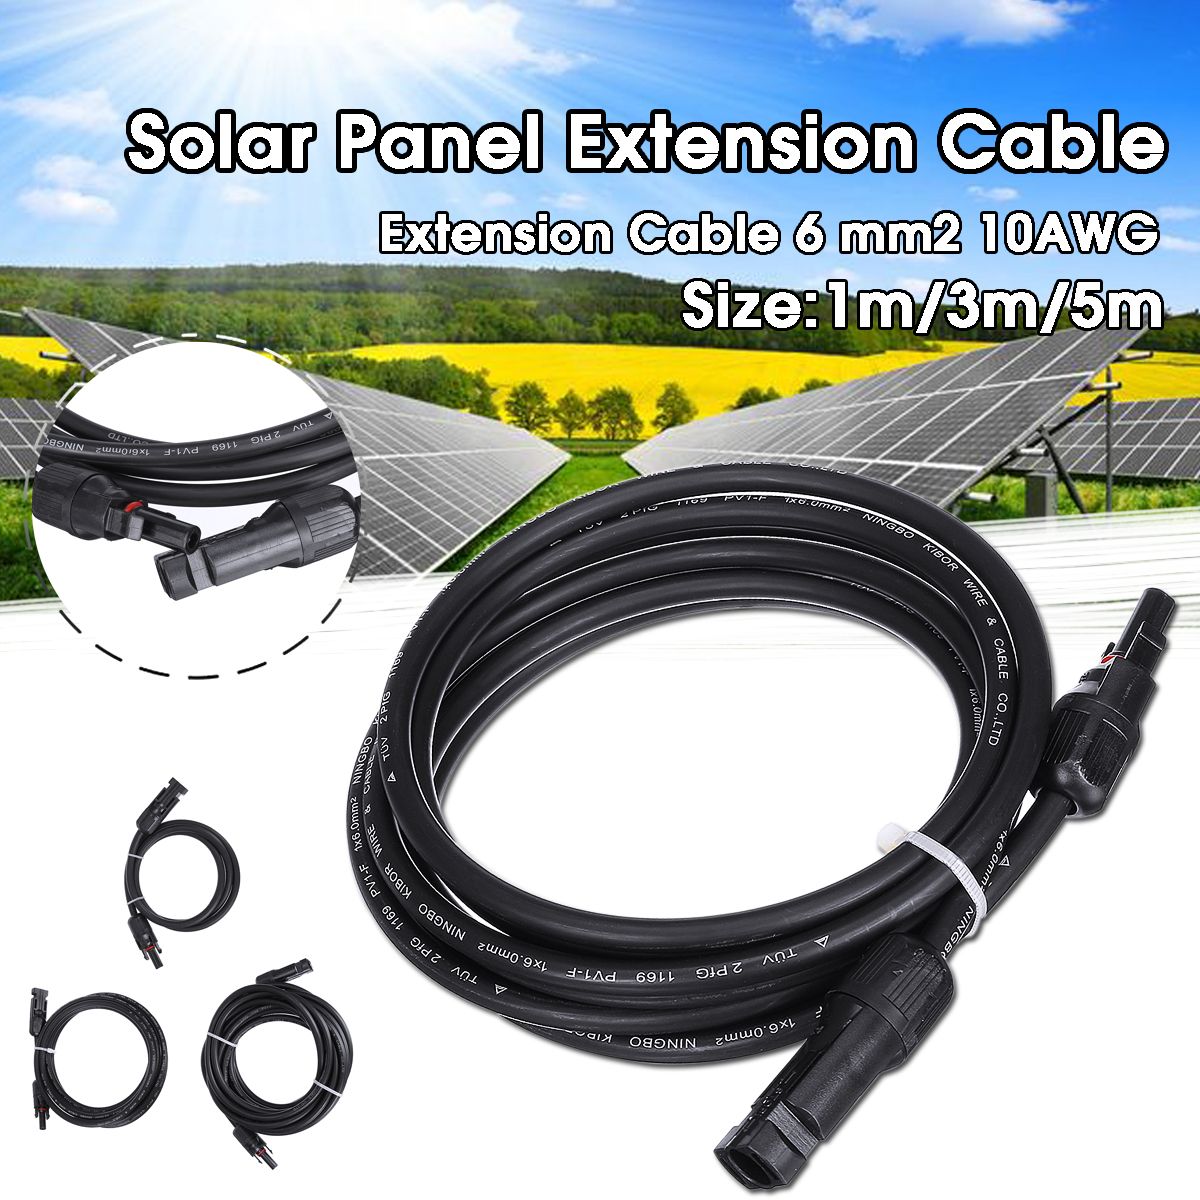 TUV-UL-6-Square-10AWG-30A-1m3m5m-Waterproof-Dustproof-Solar-panel-Parallel-Extension-Cable-Cord-with-1503586